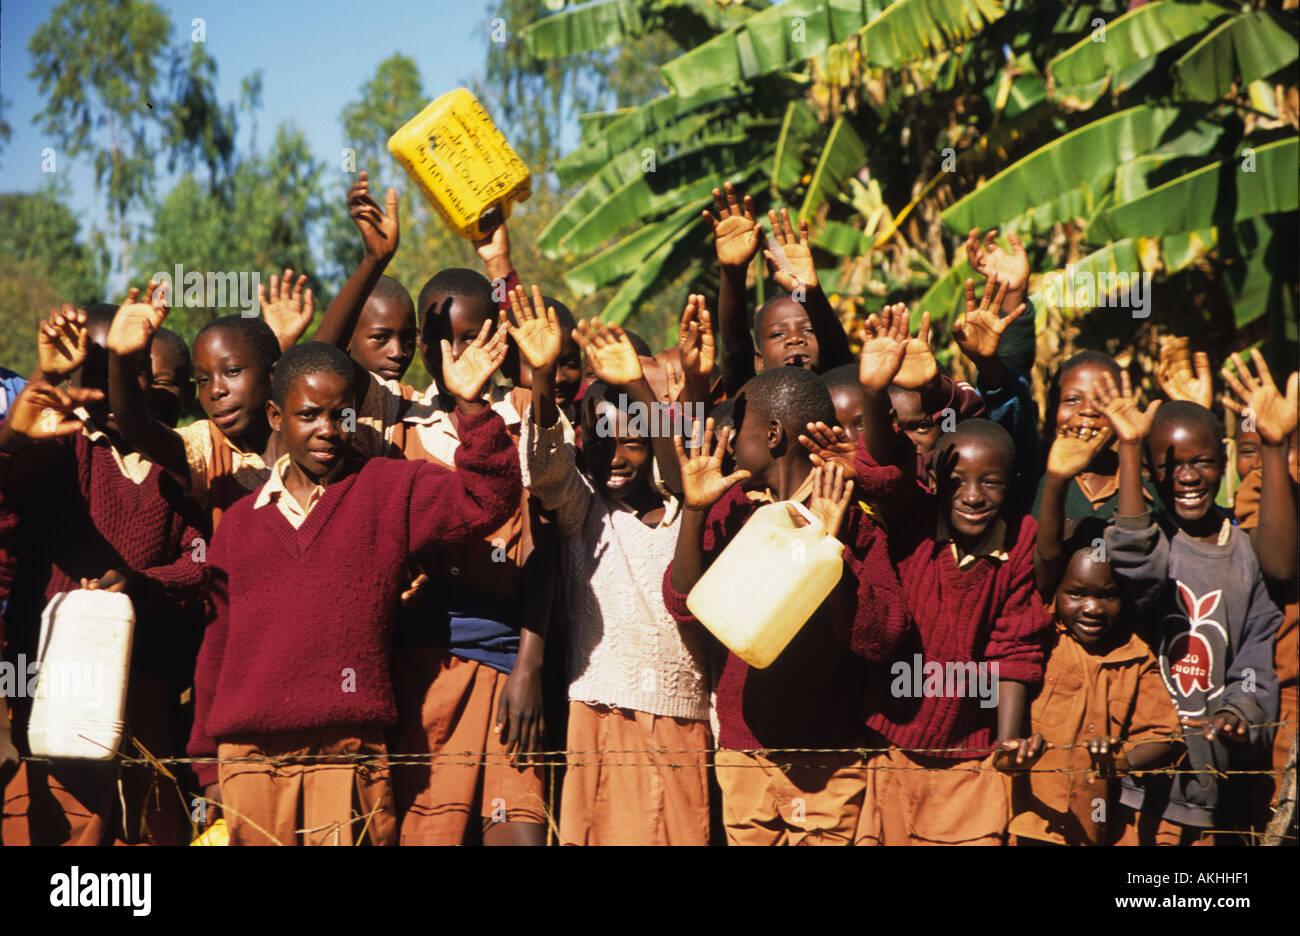 A group of school children waving, Shearley Cripps orphanage, Harare, Zimbabwe, Africa Stock Photo